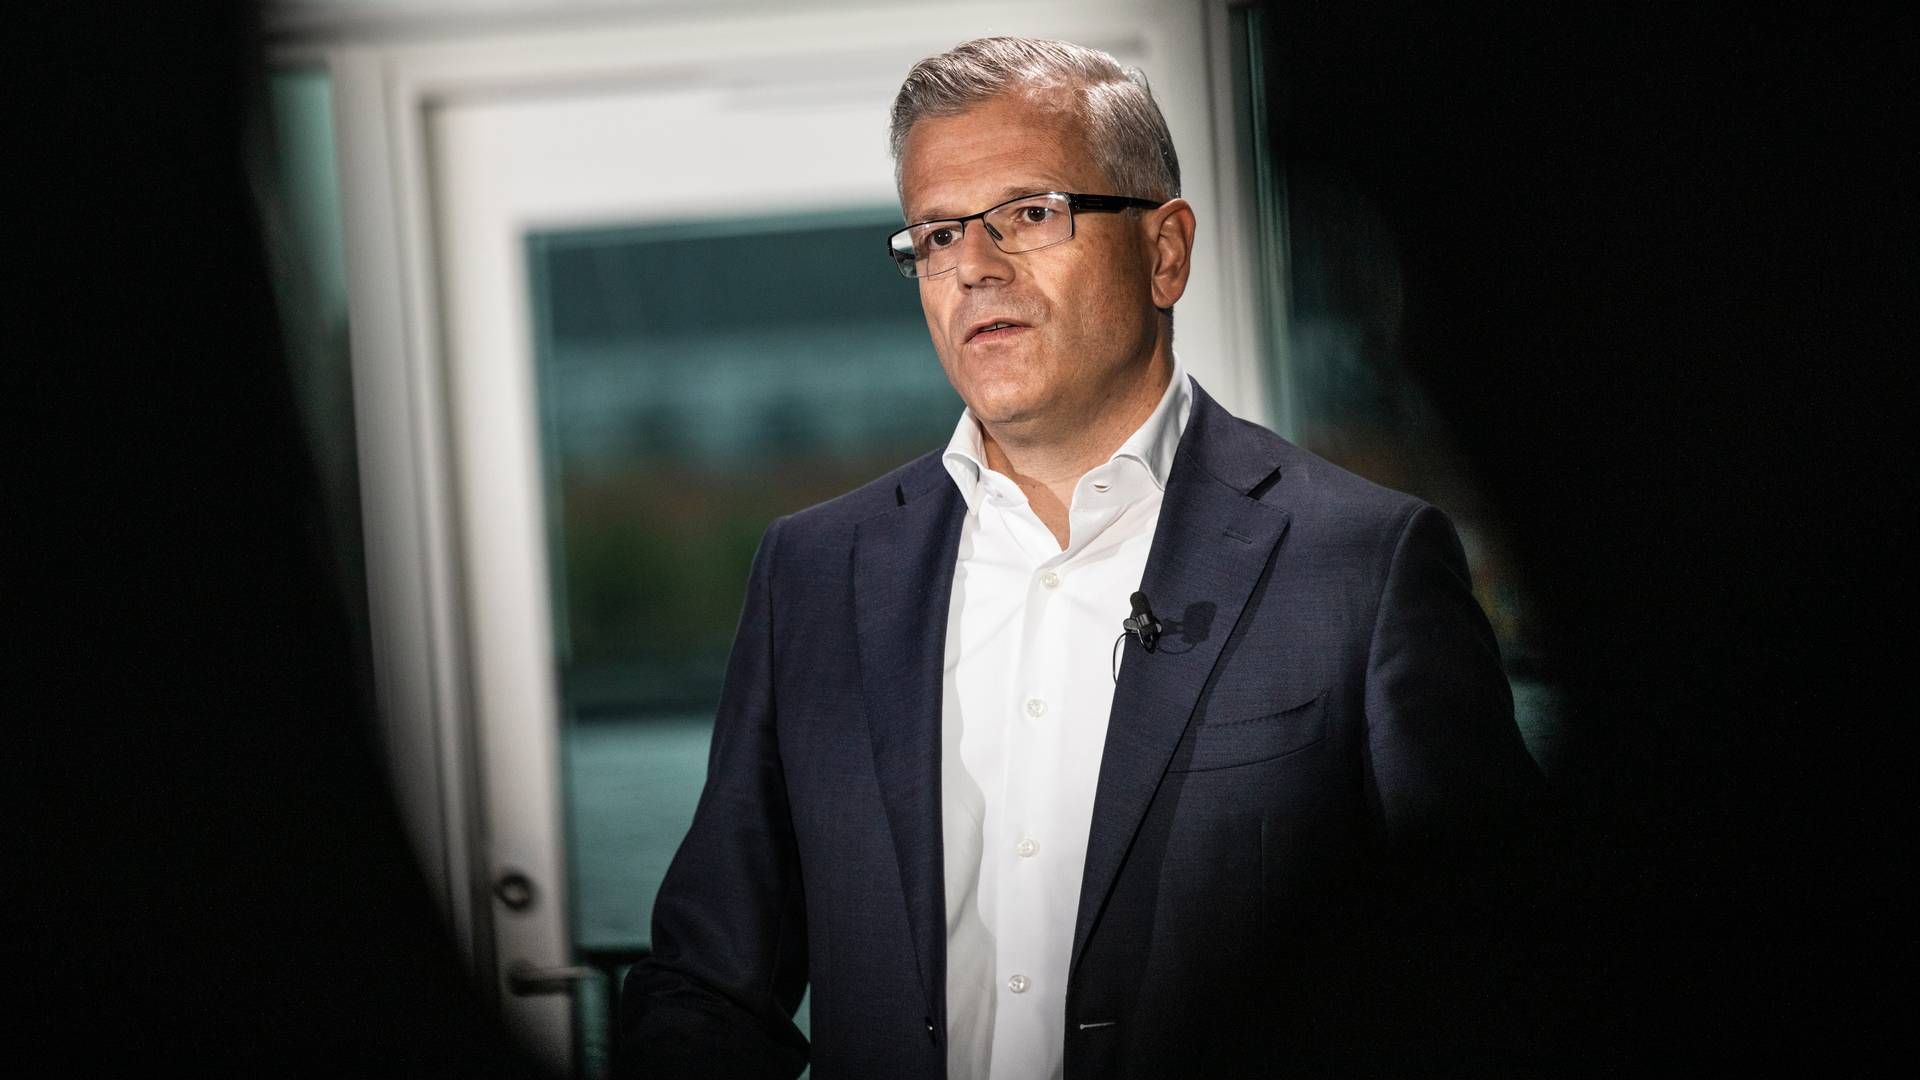 Already at the beginning of the year, Maersk CEO Vincent Clerc warned that the shipping group must rein in costs after the pandemic's celebration has been replaced by a downturn for shipping. | Photo: Maersk